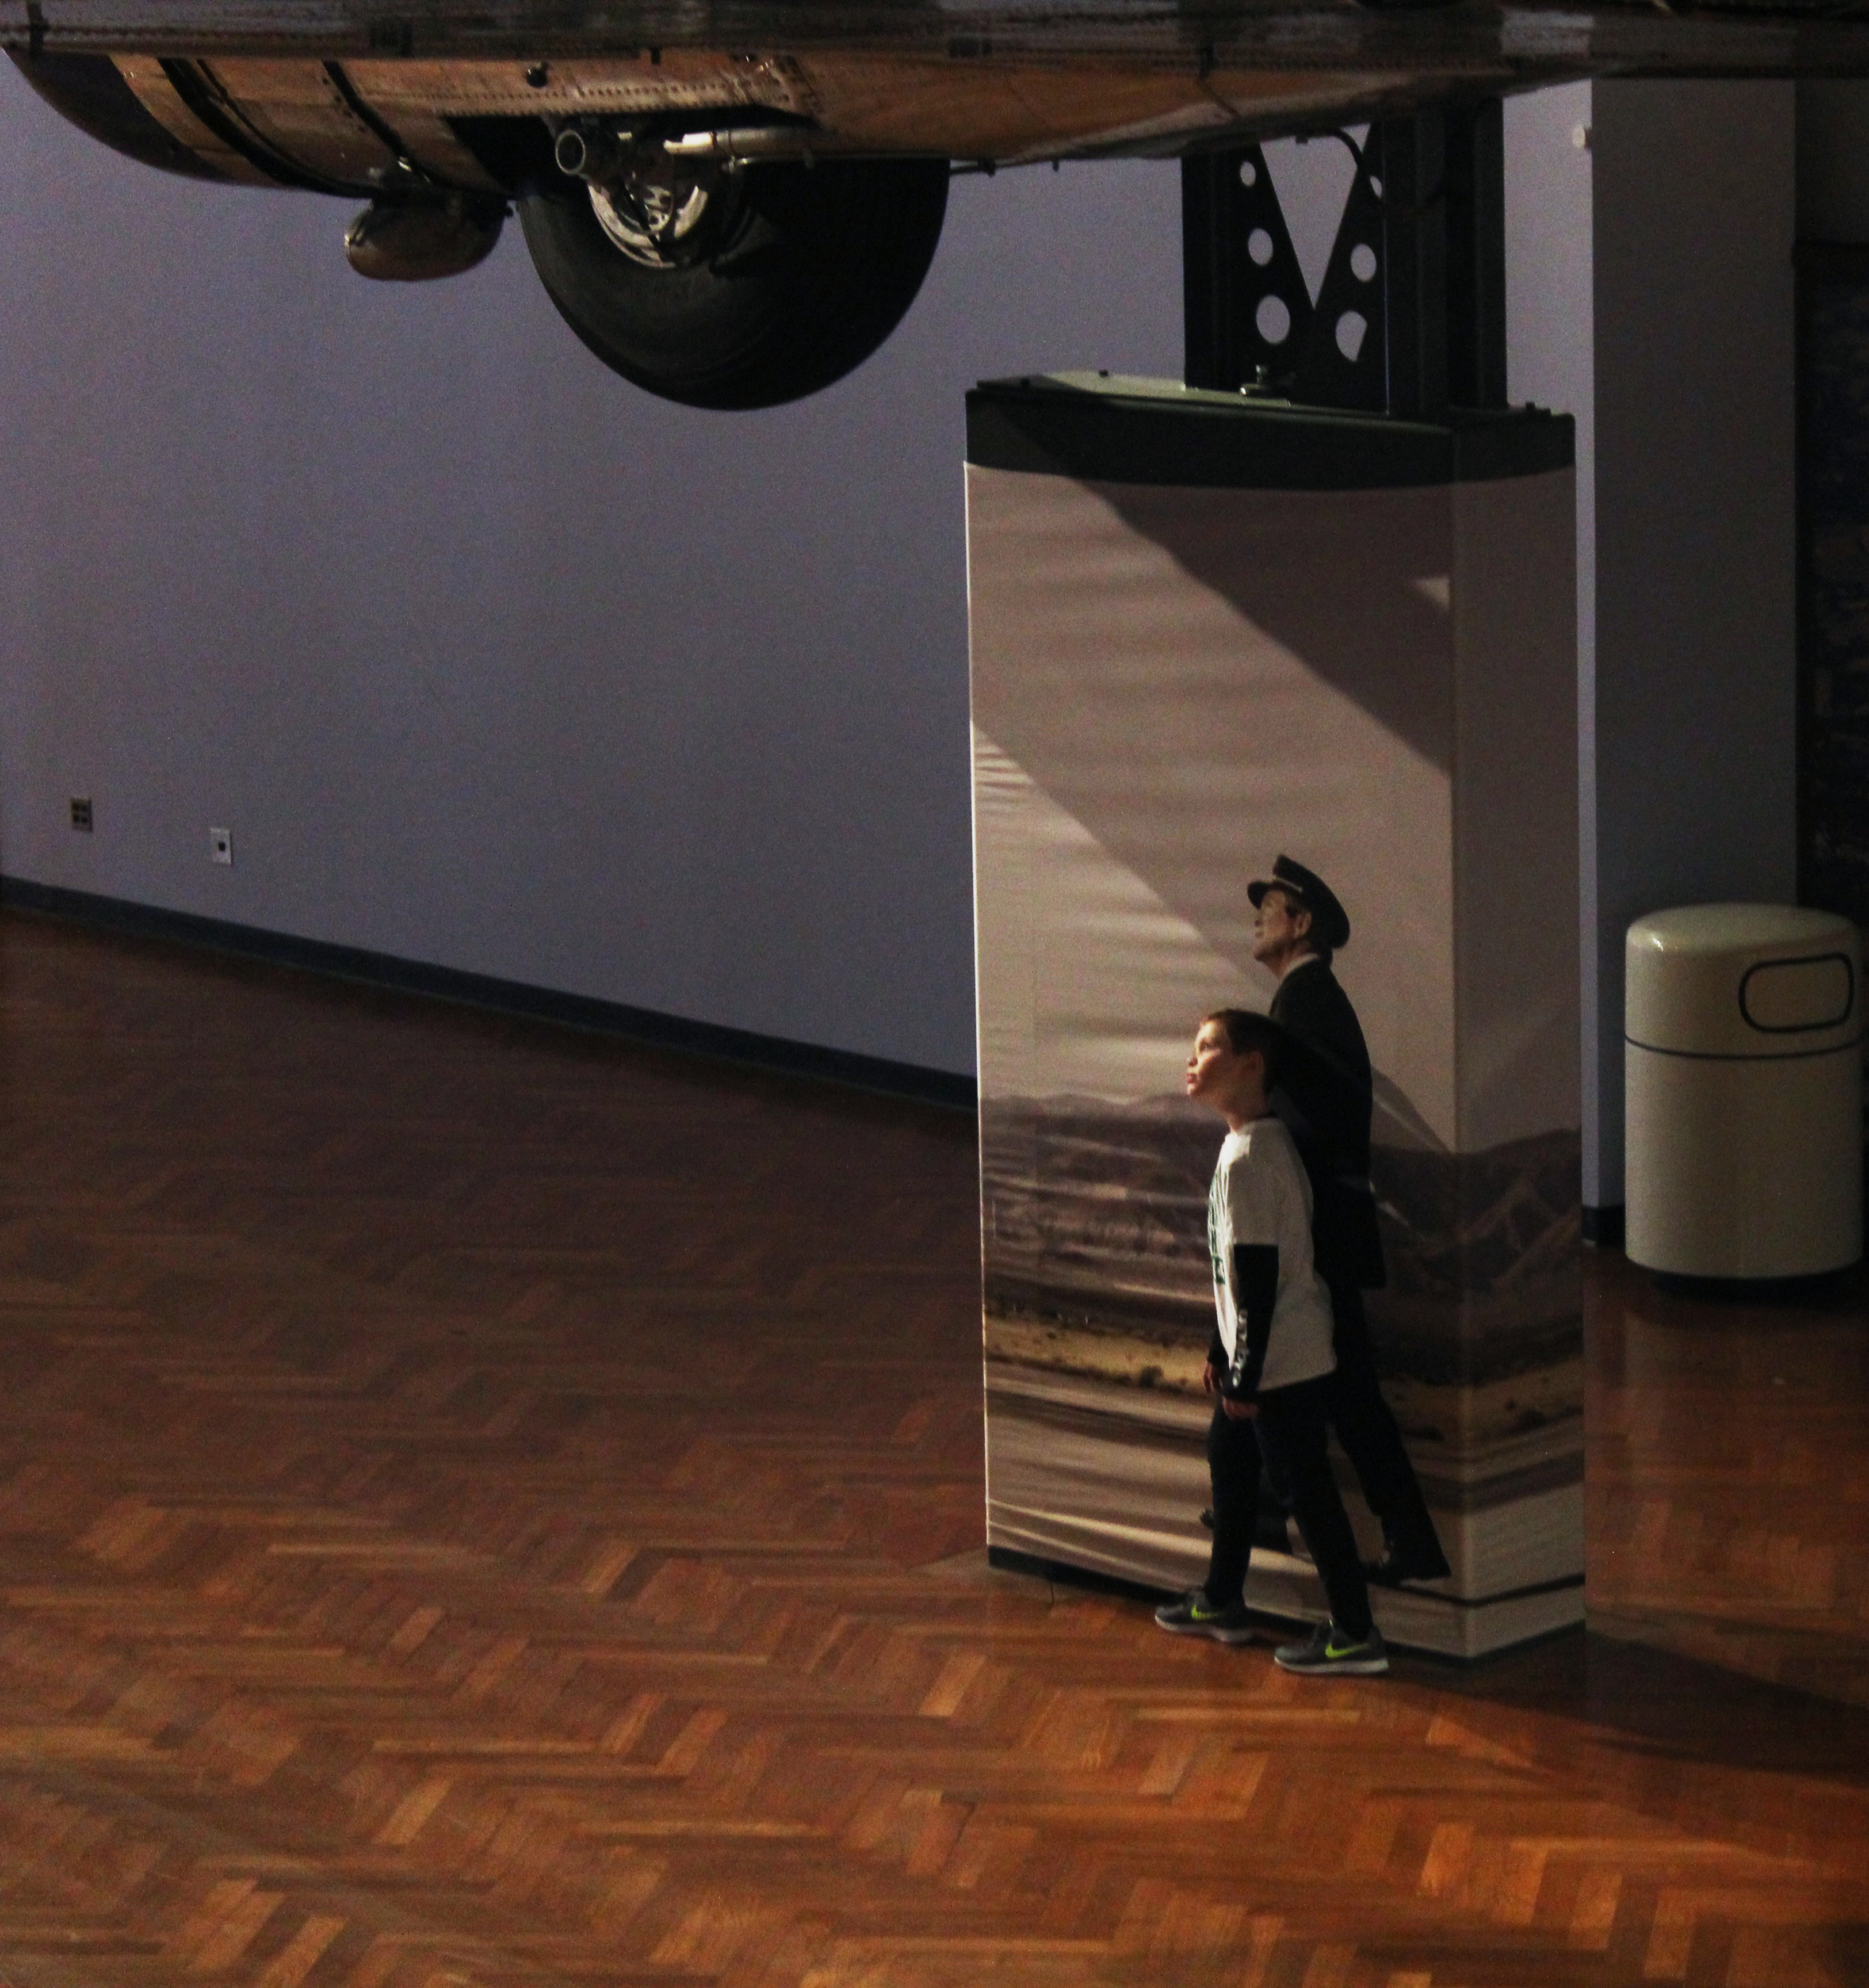 Photo of boy standing next to the image of a pilot as if he is part of the image underneath an airplane hanging at The Henry Ford museum in Dearborn, Michigan.